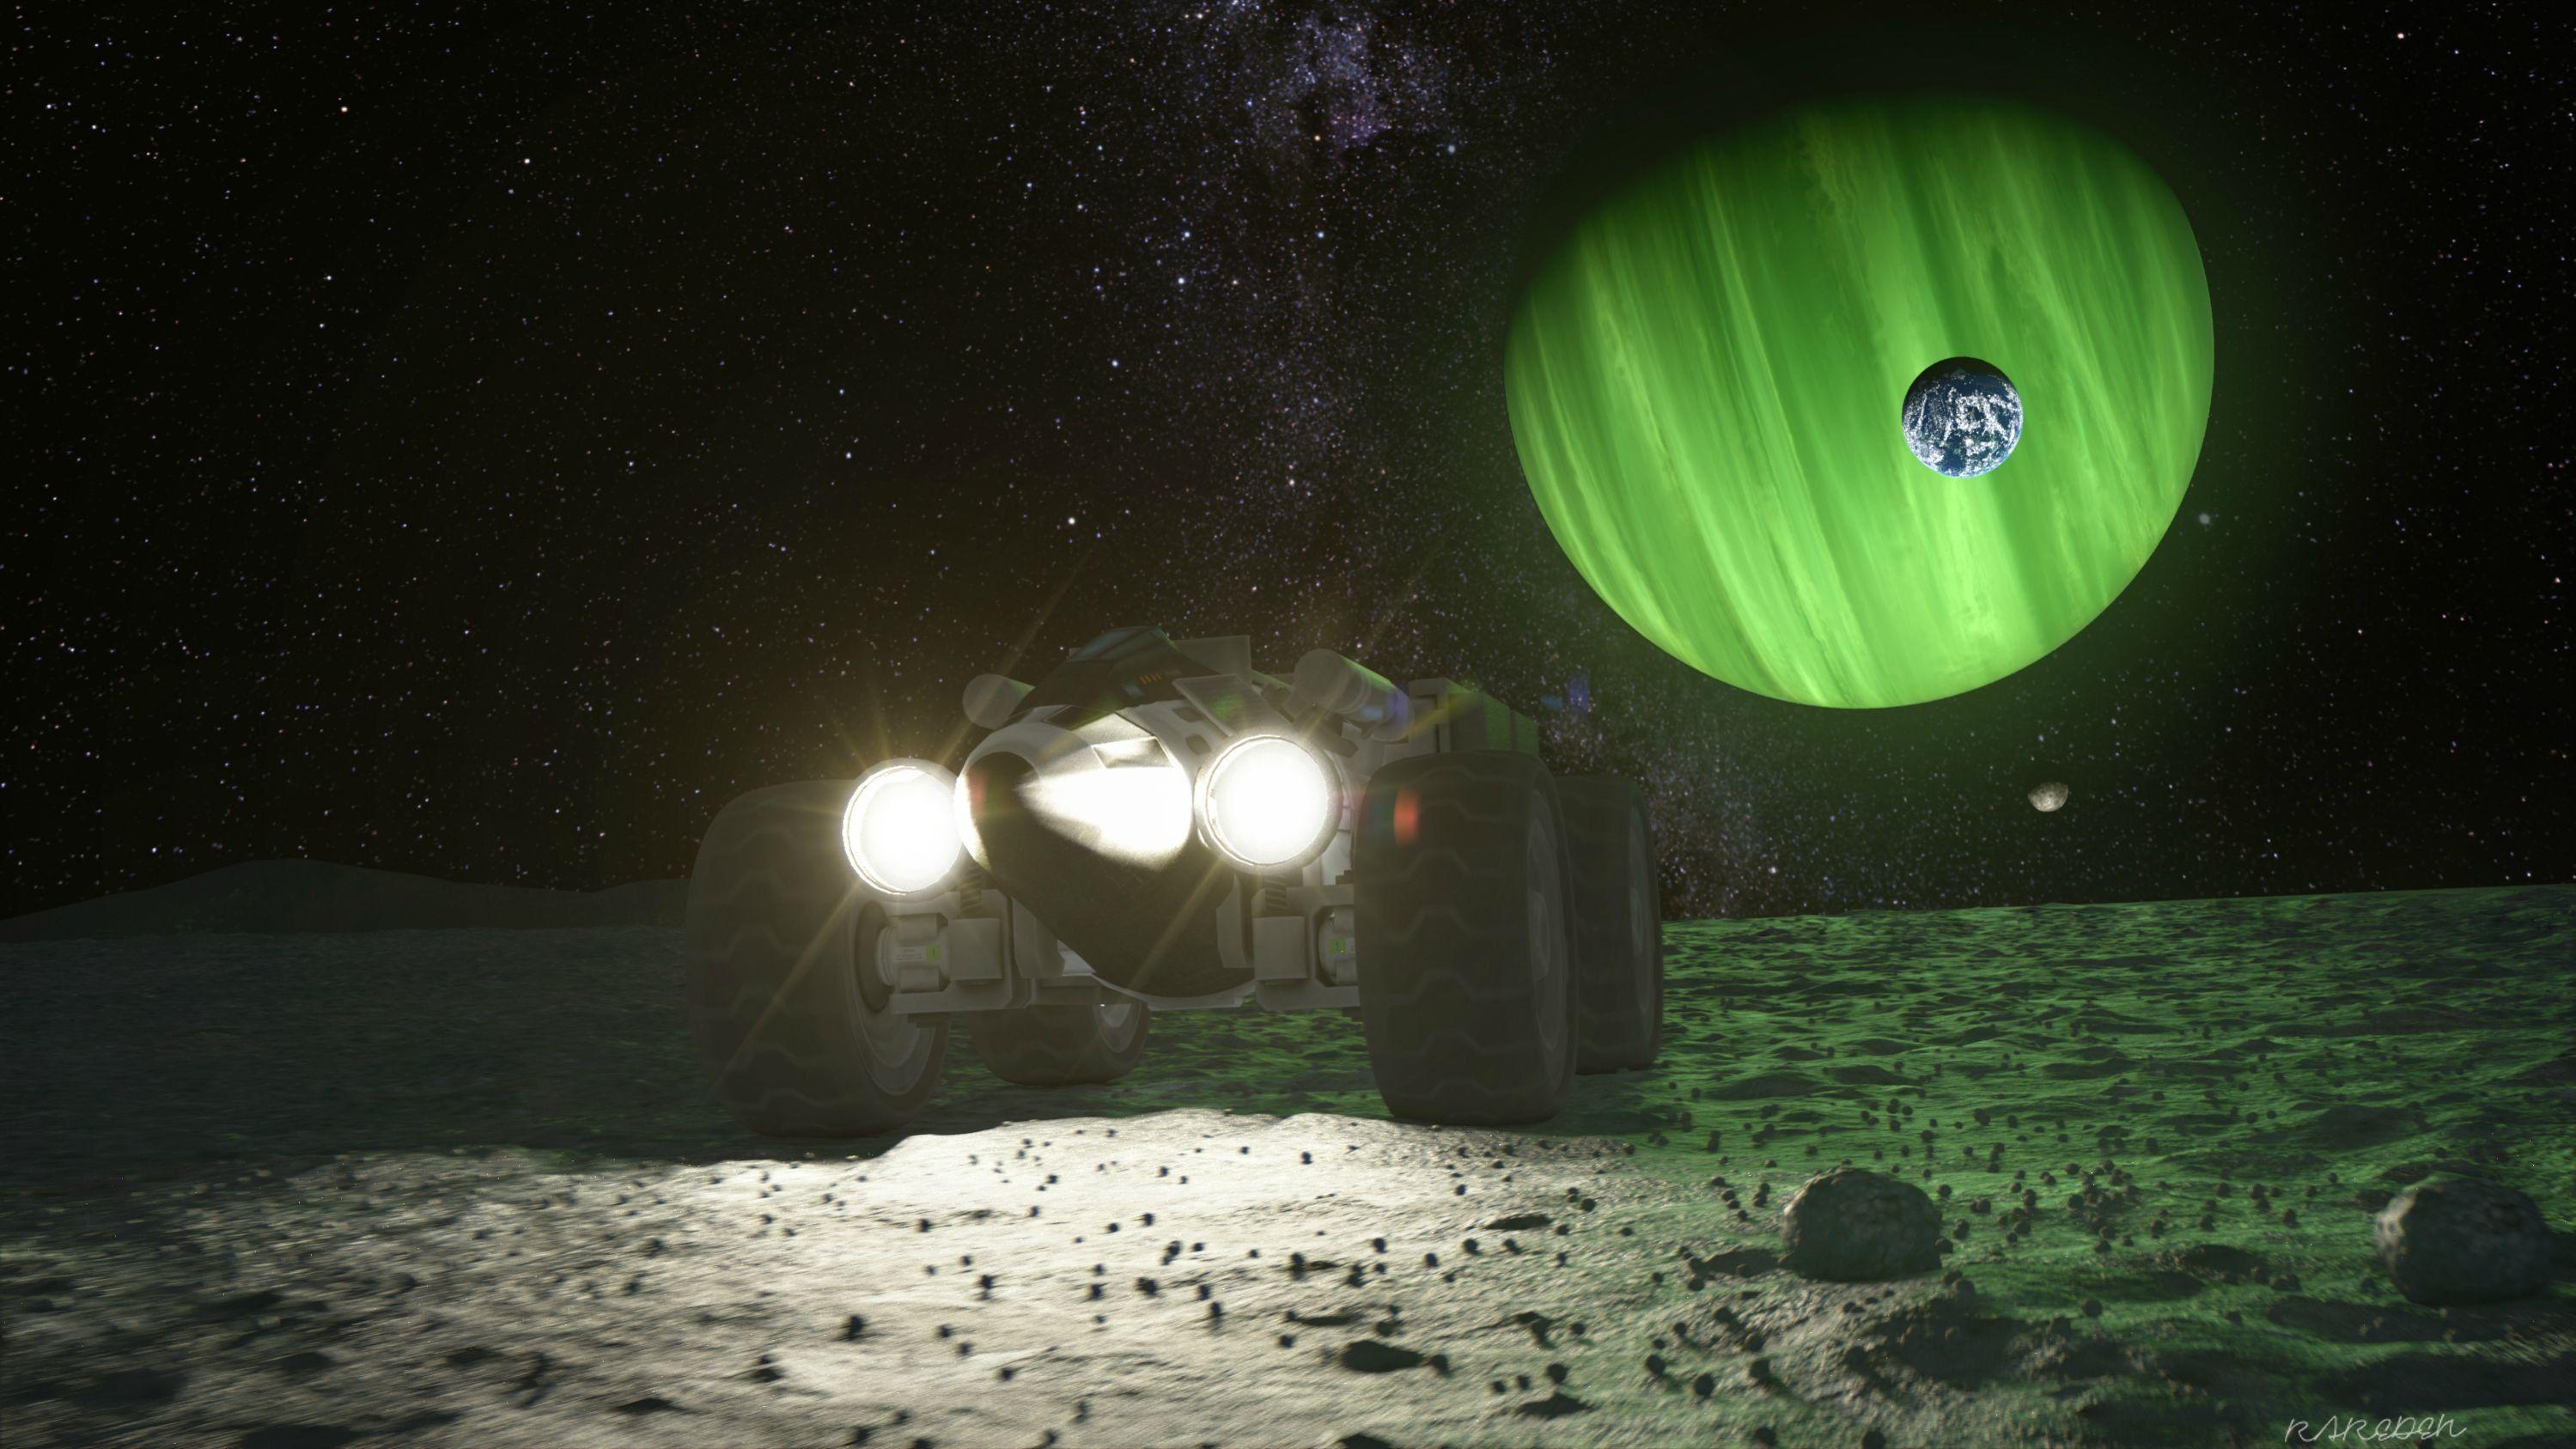 Some 1080p Kerbal Space Program wallpaper, because why the hell not